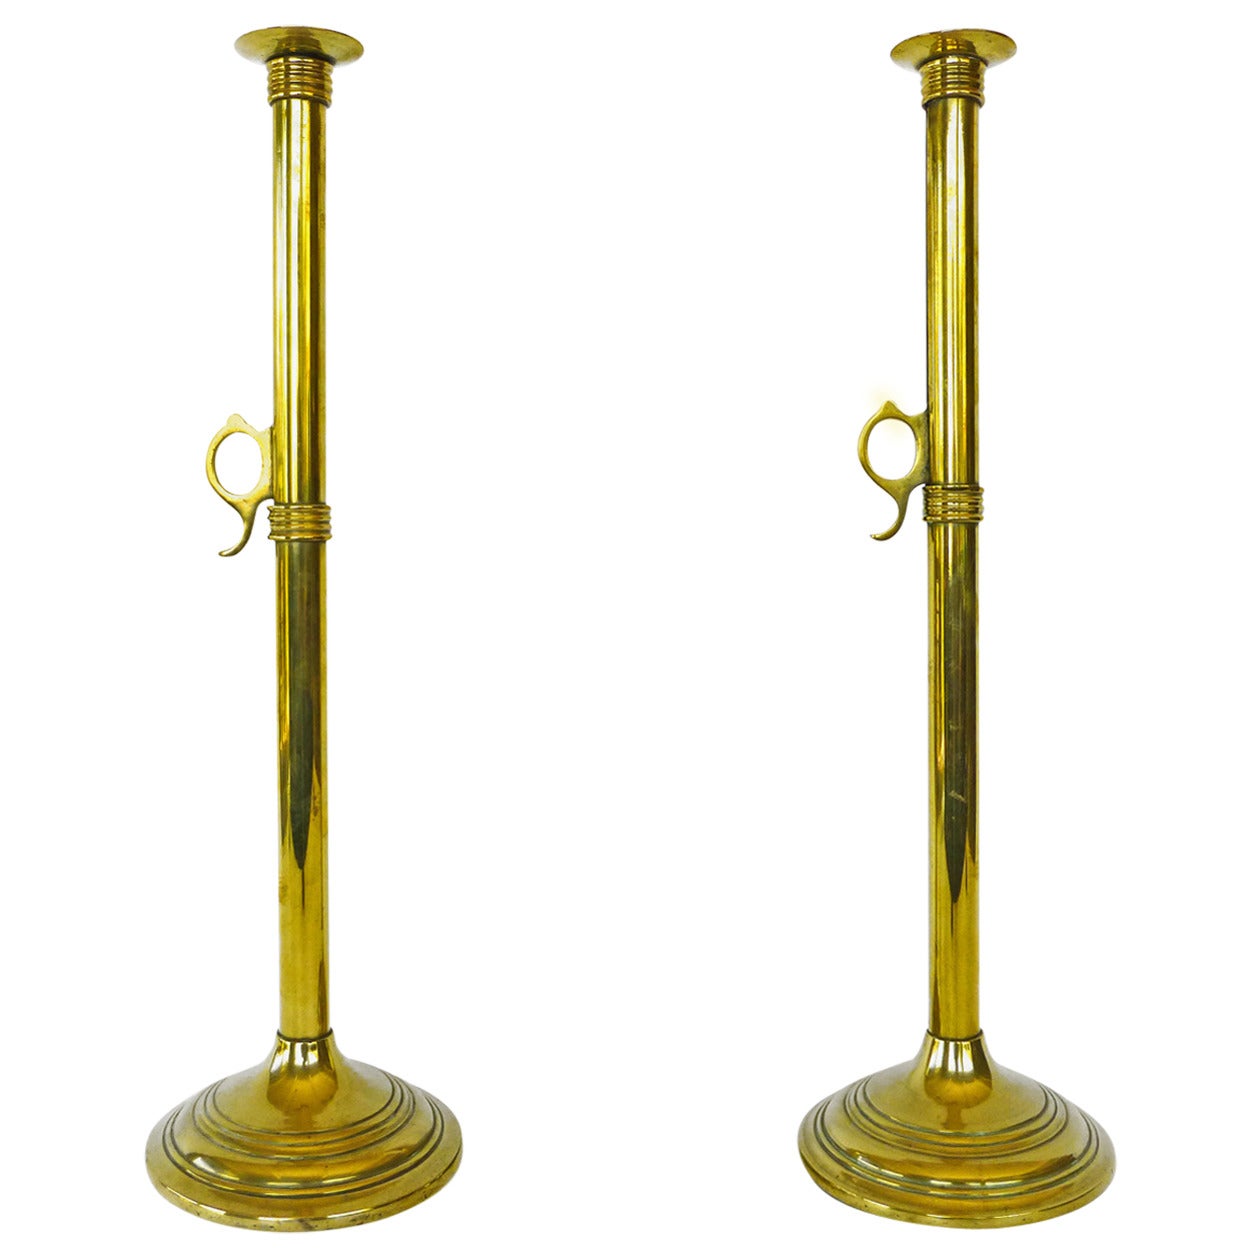 English Brass Pulpit Sticks with Side Ejectors, circa 1875 For Sale